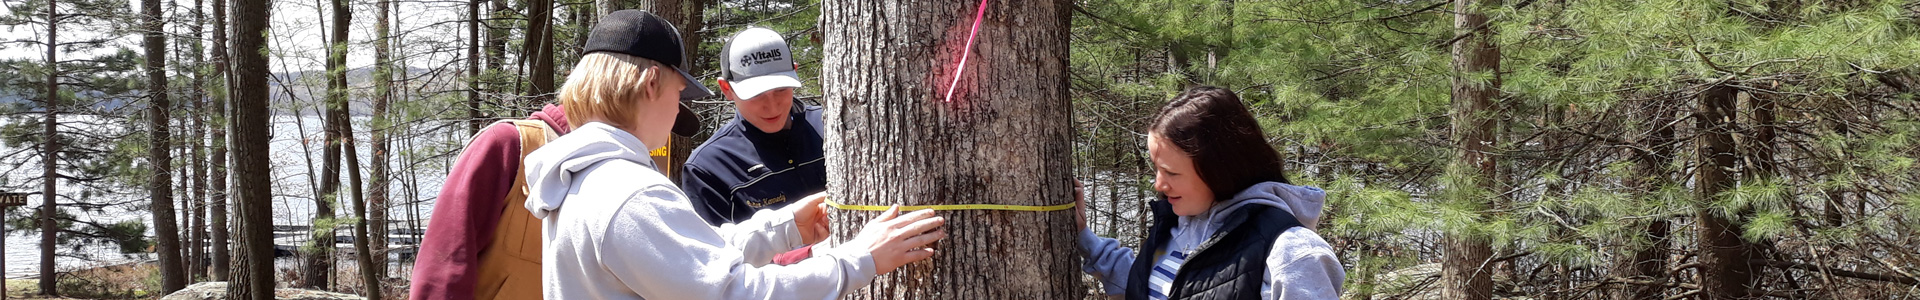 Students measure the circumference of an oak tree with a tape measure